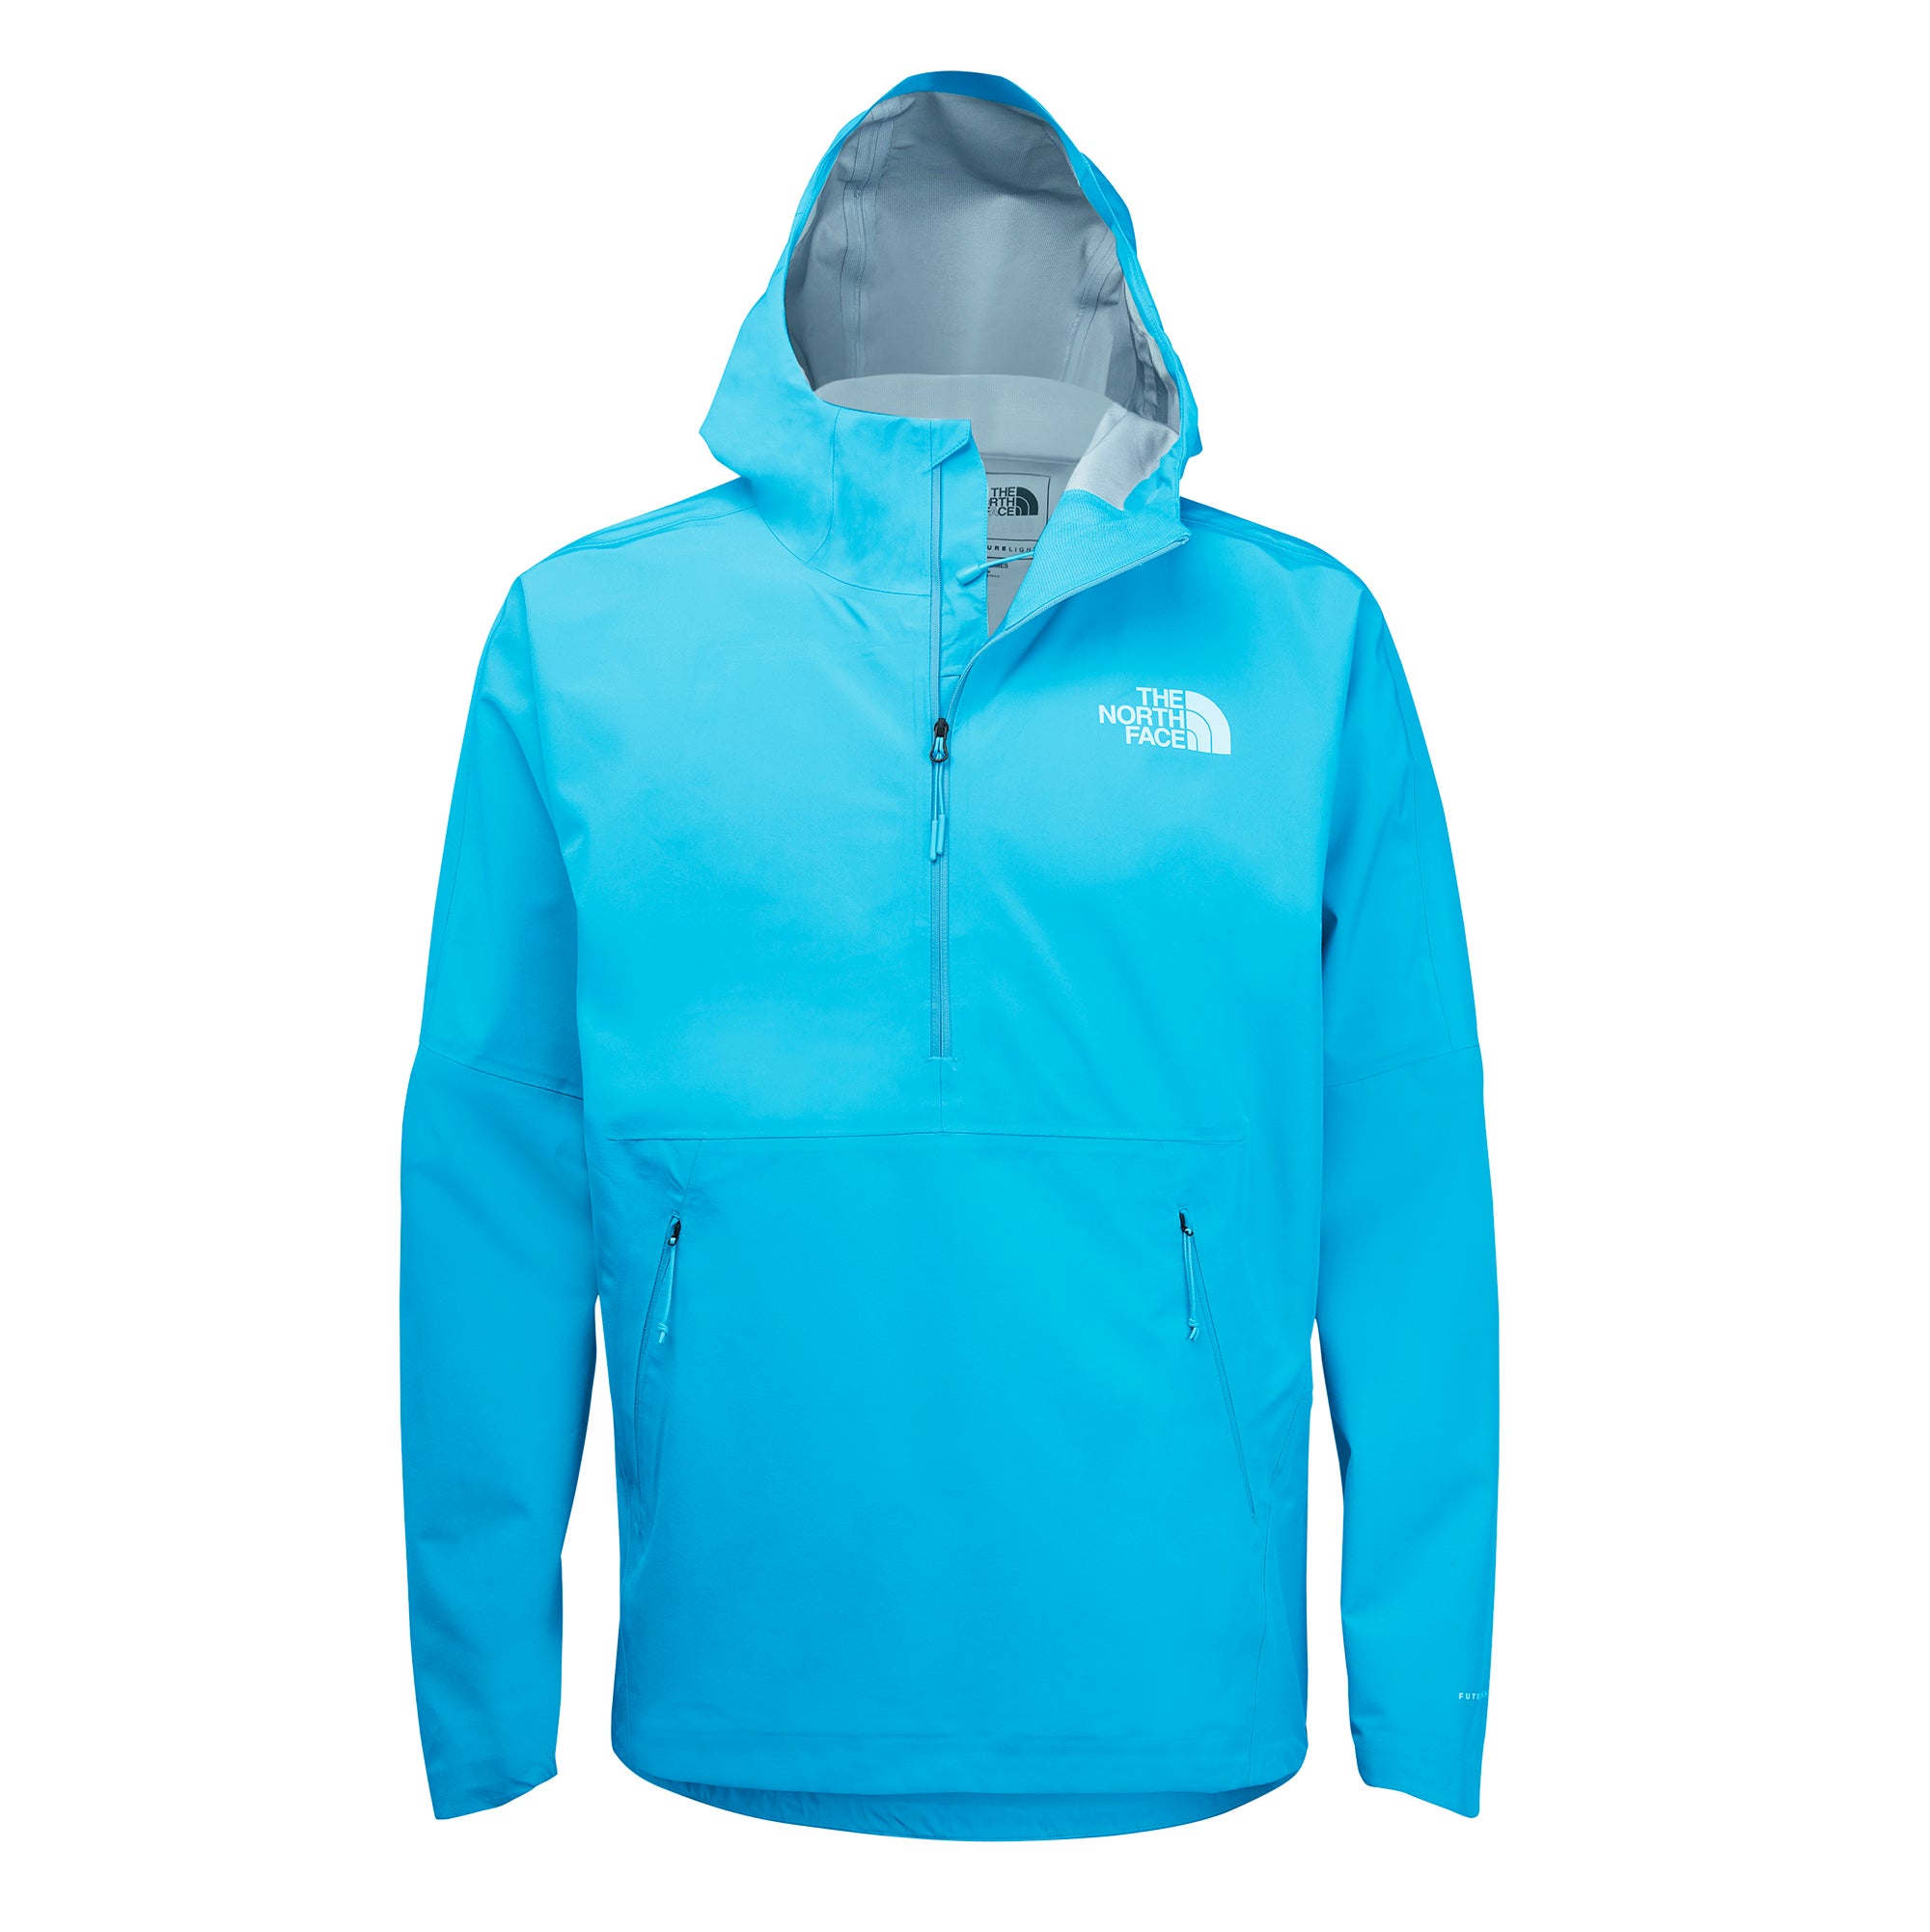 What our Members are Testing Now: The North Face Sotara